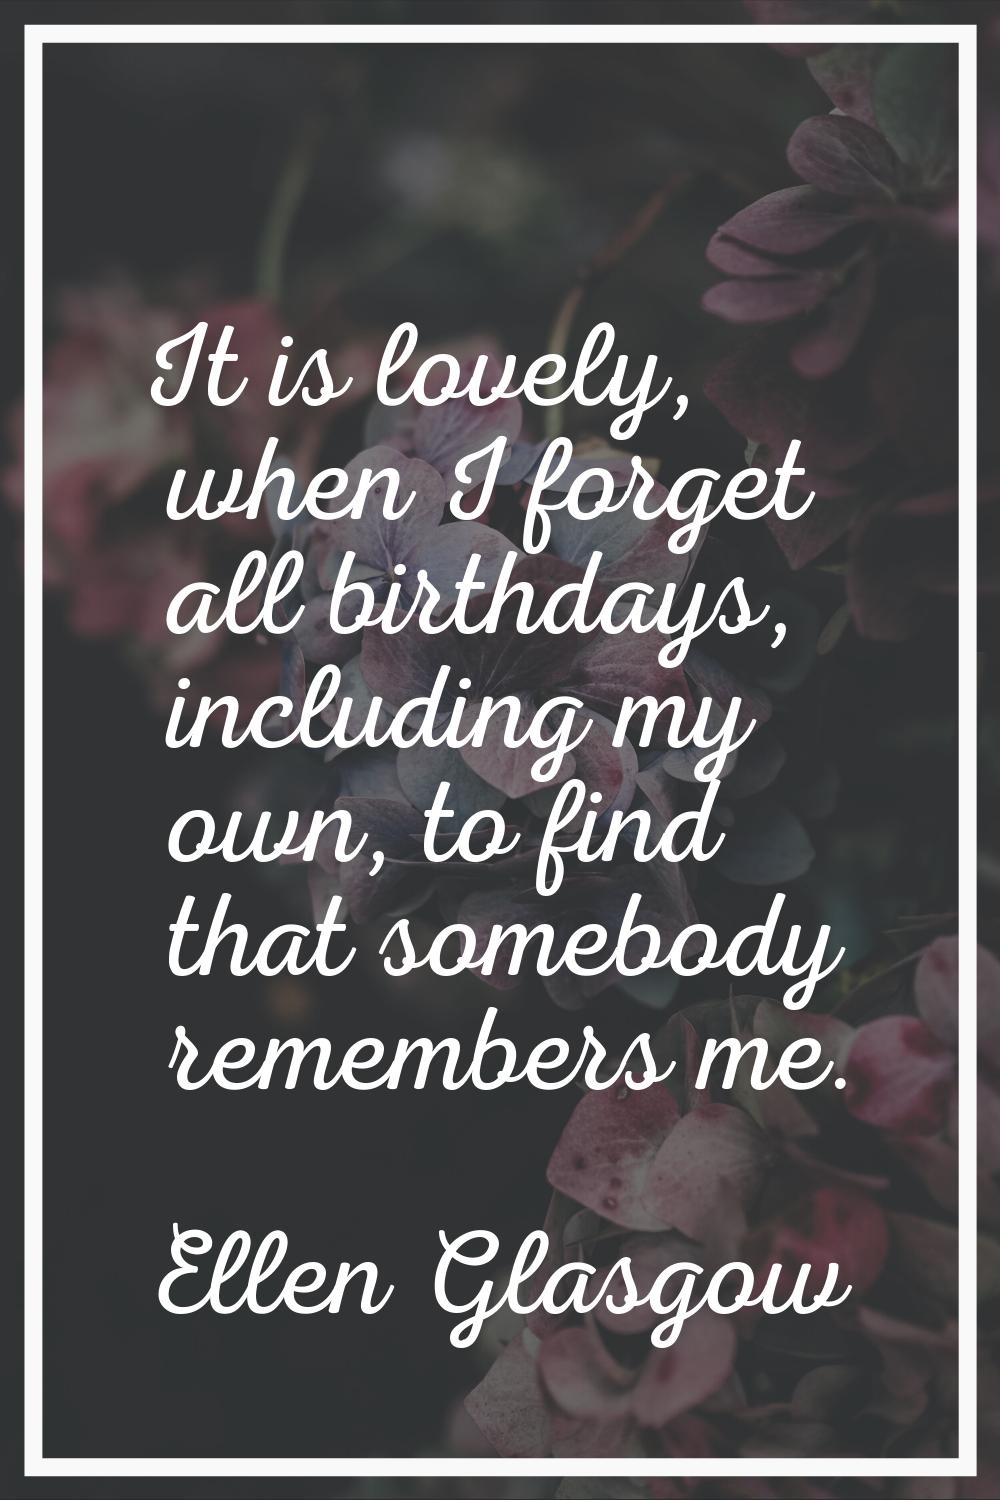 It is lovely, when I forget all birthdays, including my own, to find that somebody remembers me.